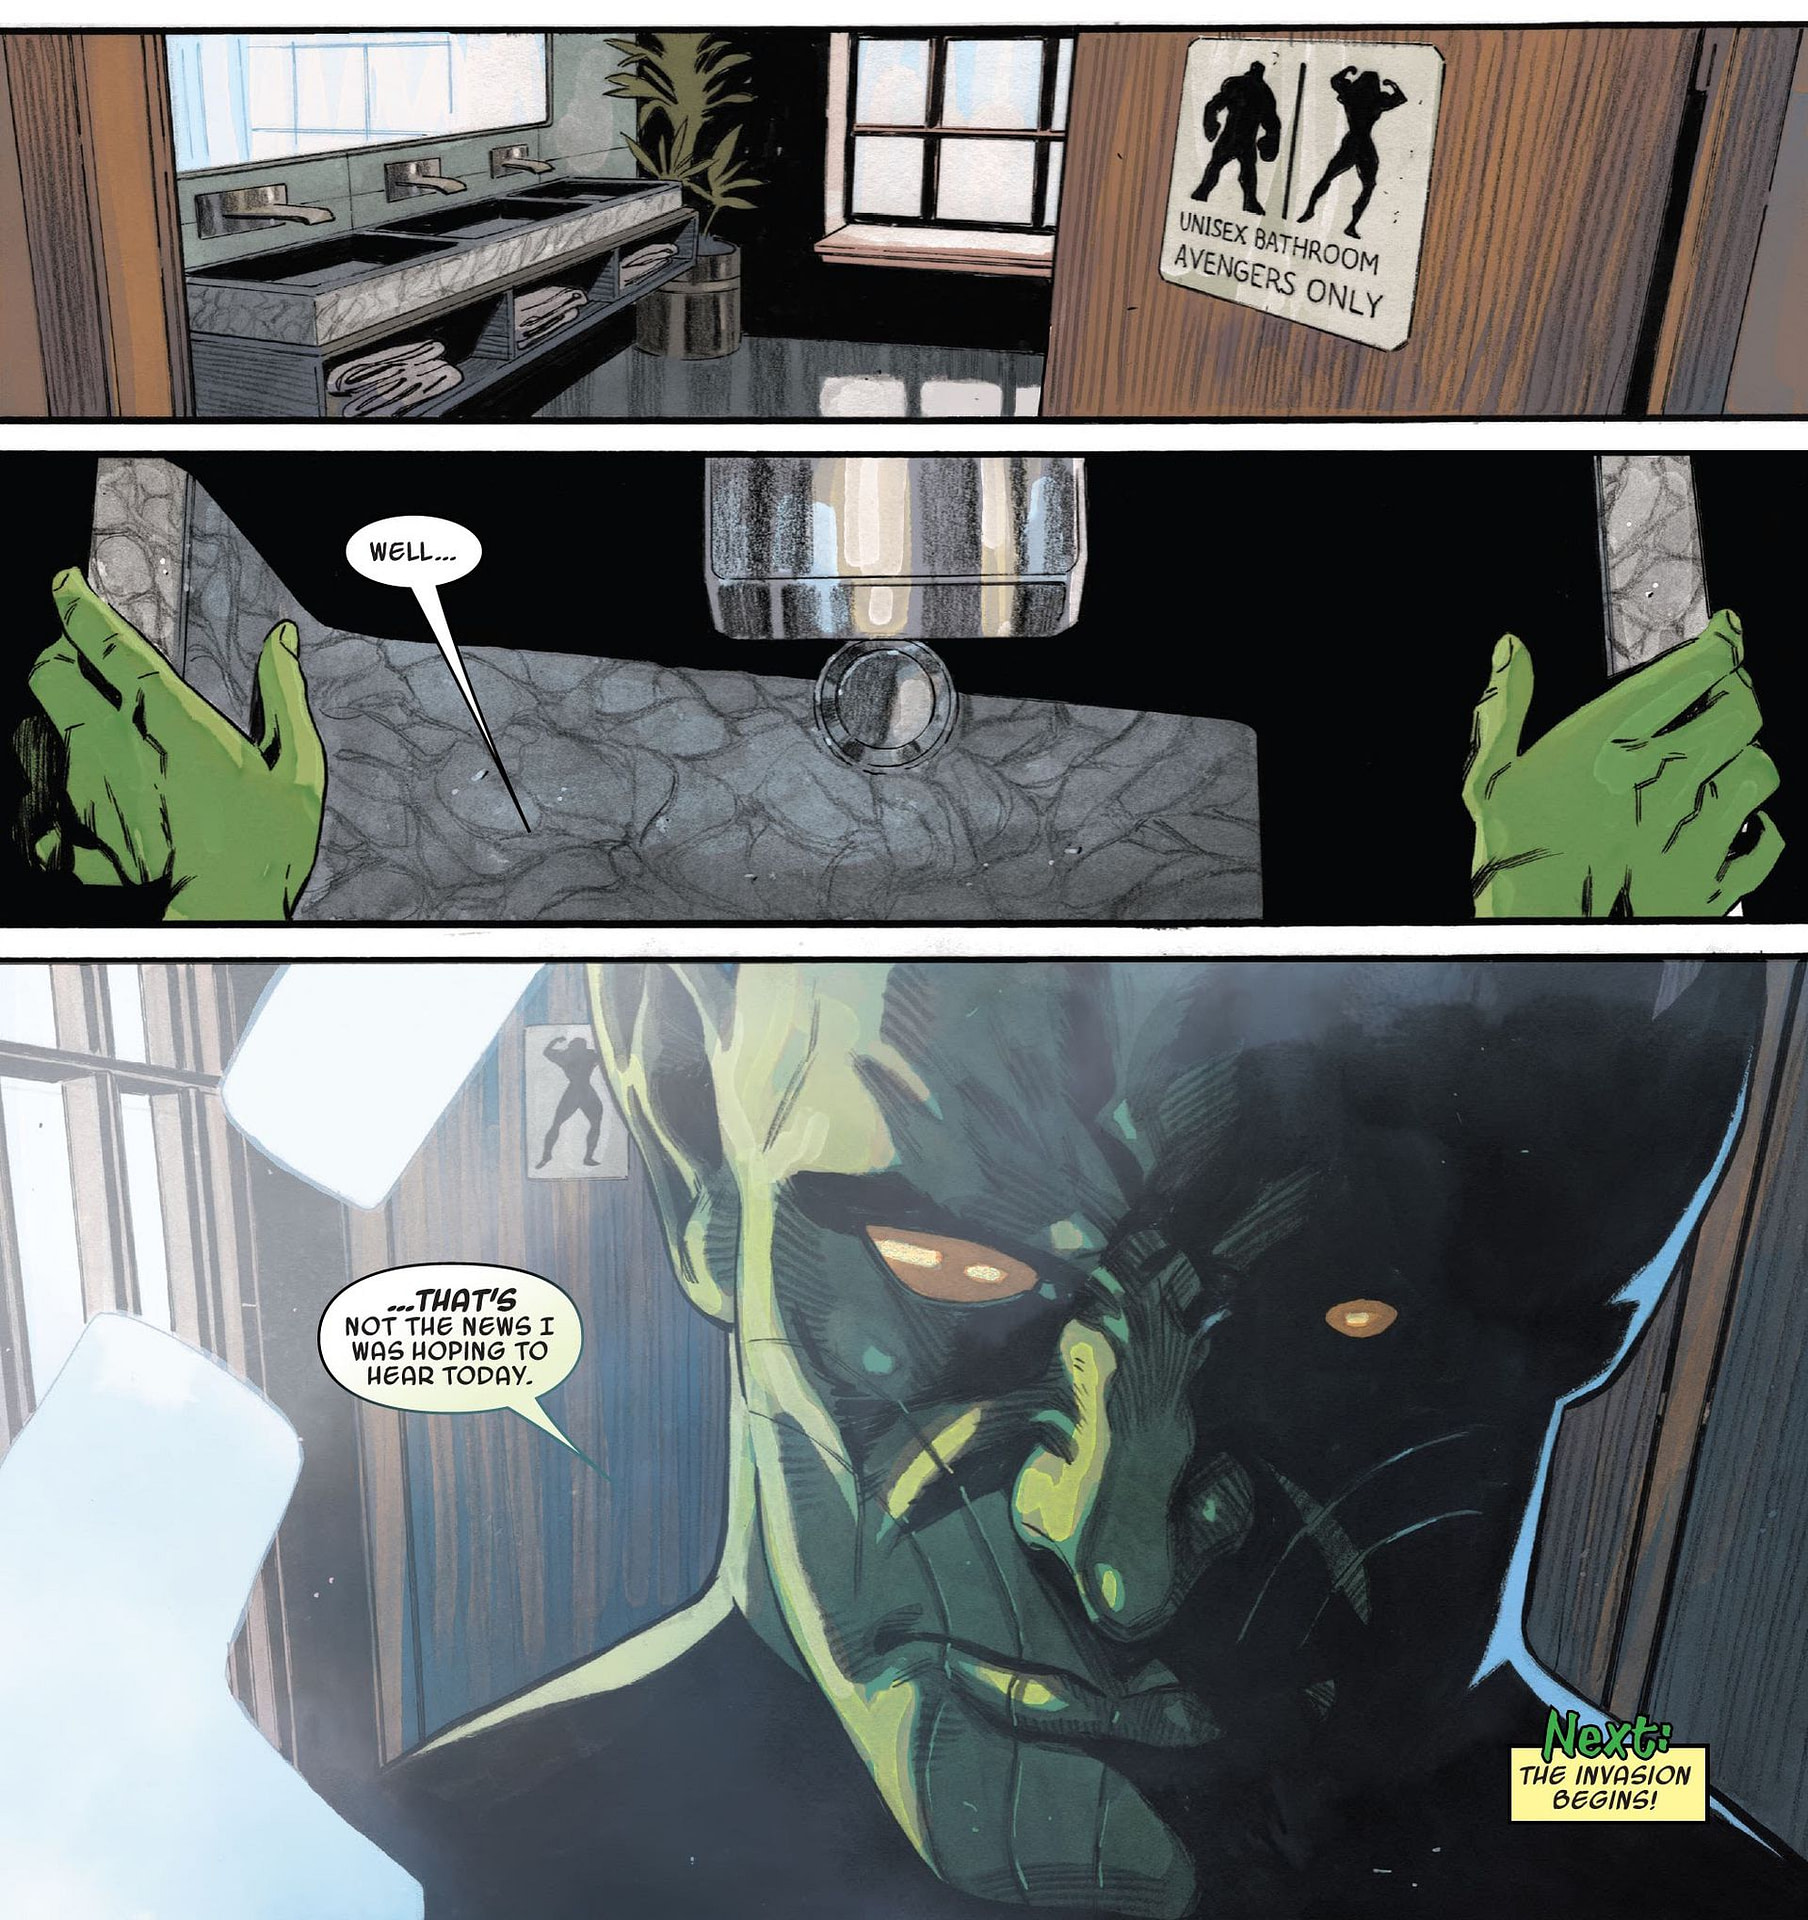 There’s a Skrull in the Avengers’ unisex bathroom